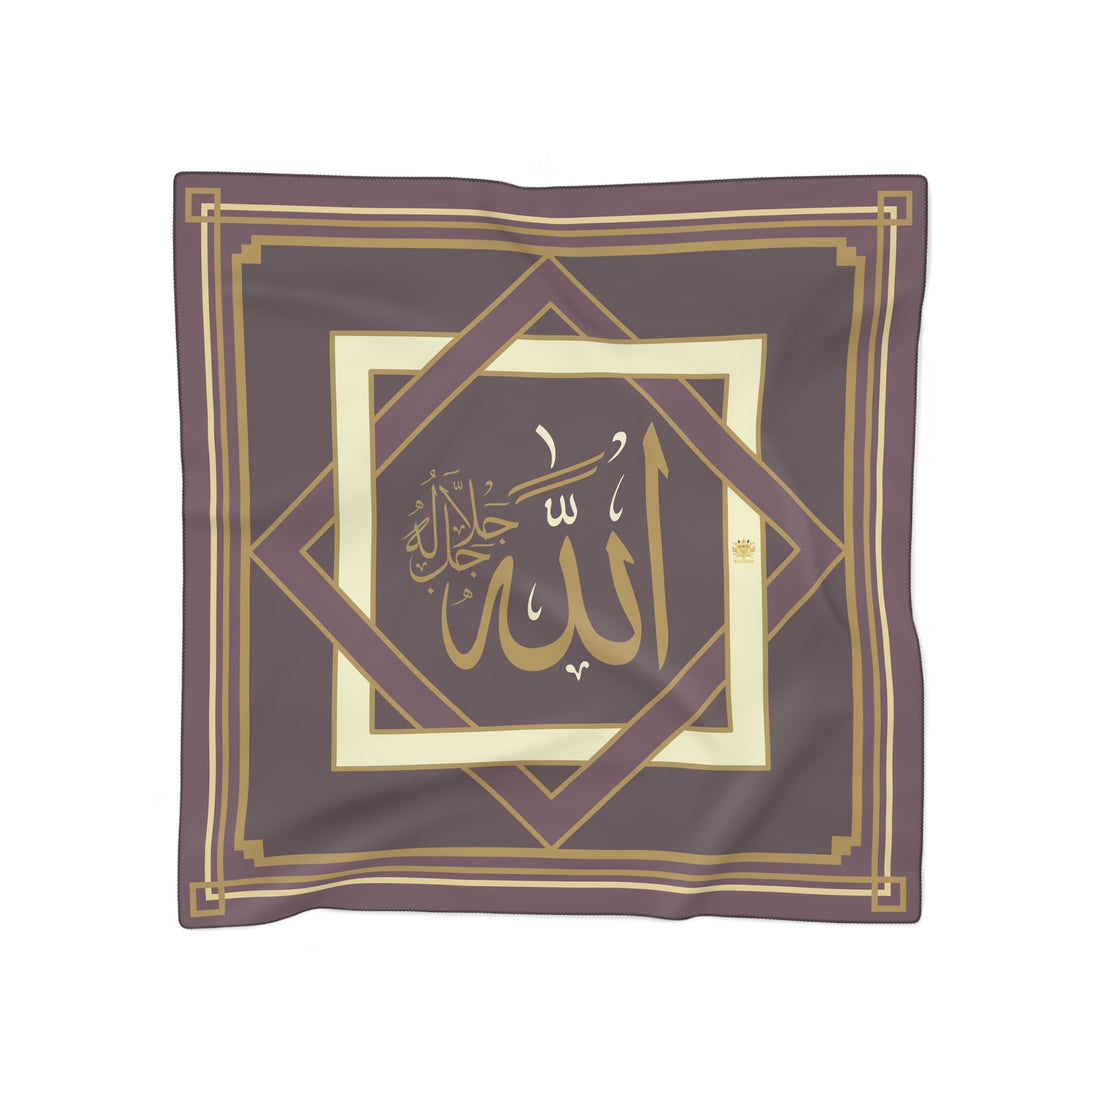 In The Name Of Allah The Most Merciful~So There Is No God But Allah~Allah Is With The Patient- Poly/Chiffon Scarf W/ Kngdom Logo